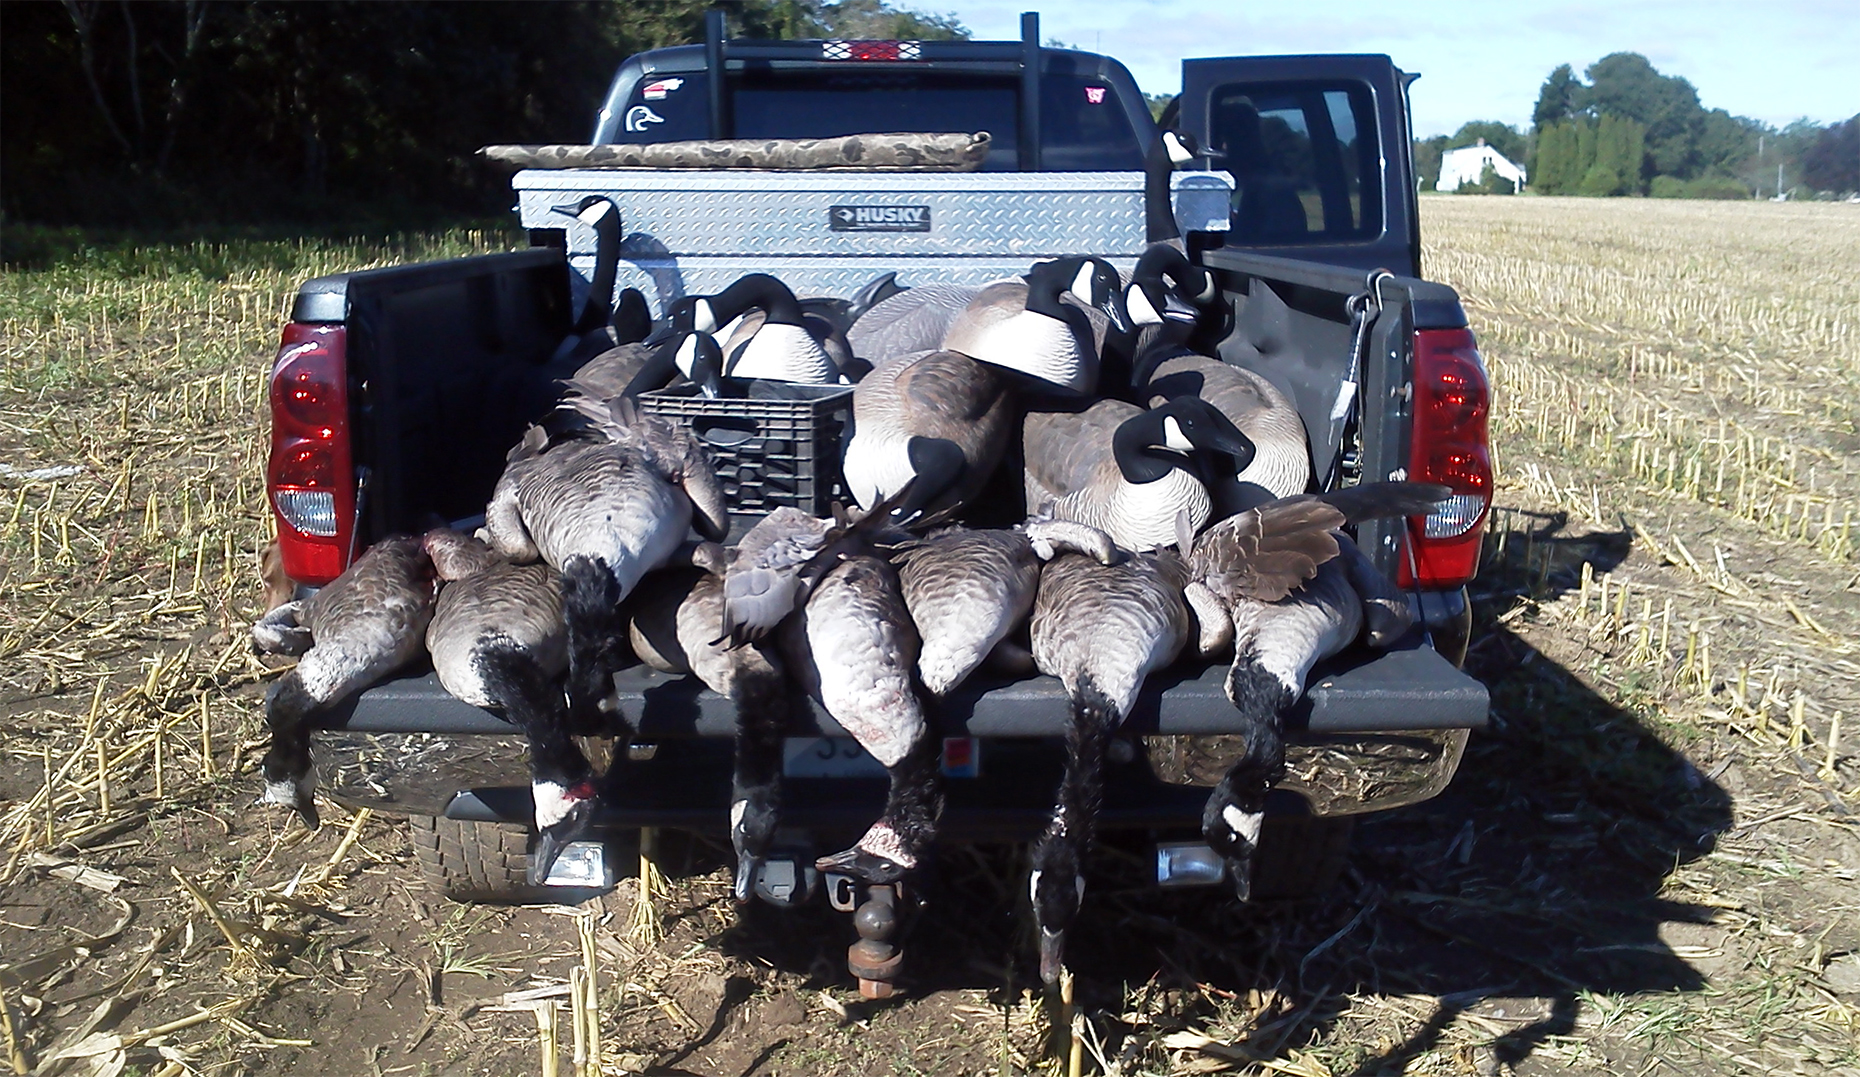 Pickup full of birds and decoys